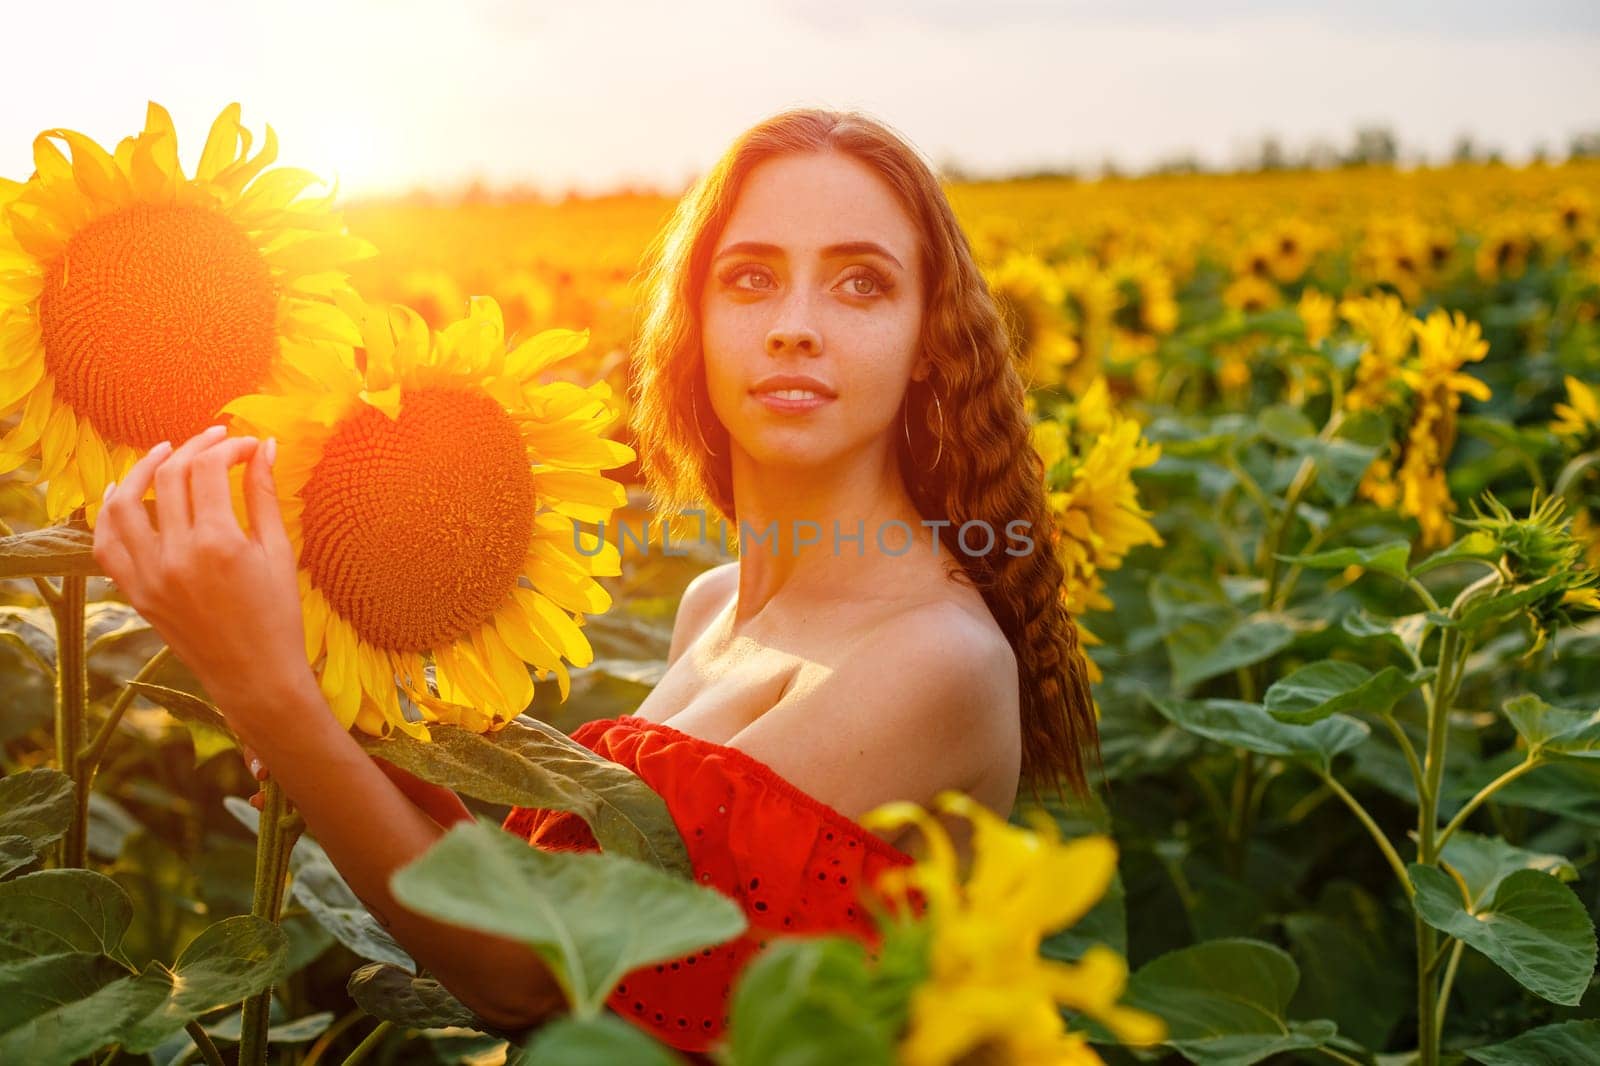 Beautiful curly young woman in sunflower field holding sunflower flower in hand . Portrait of young woman in sun smiling cute. Charming girl of Caucasian appearance with wavy hair in a red dress